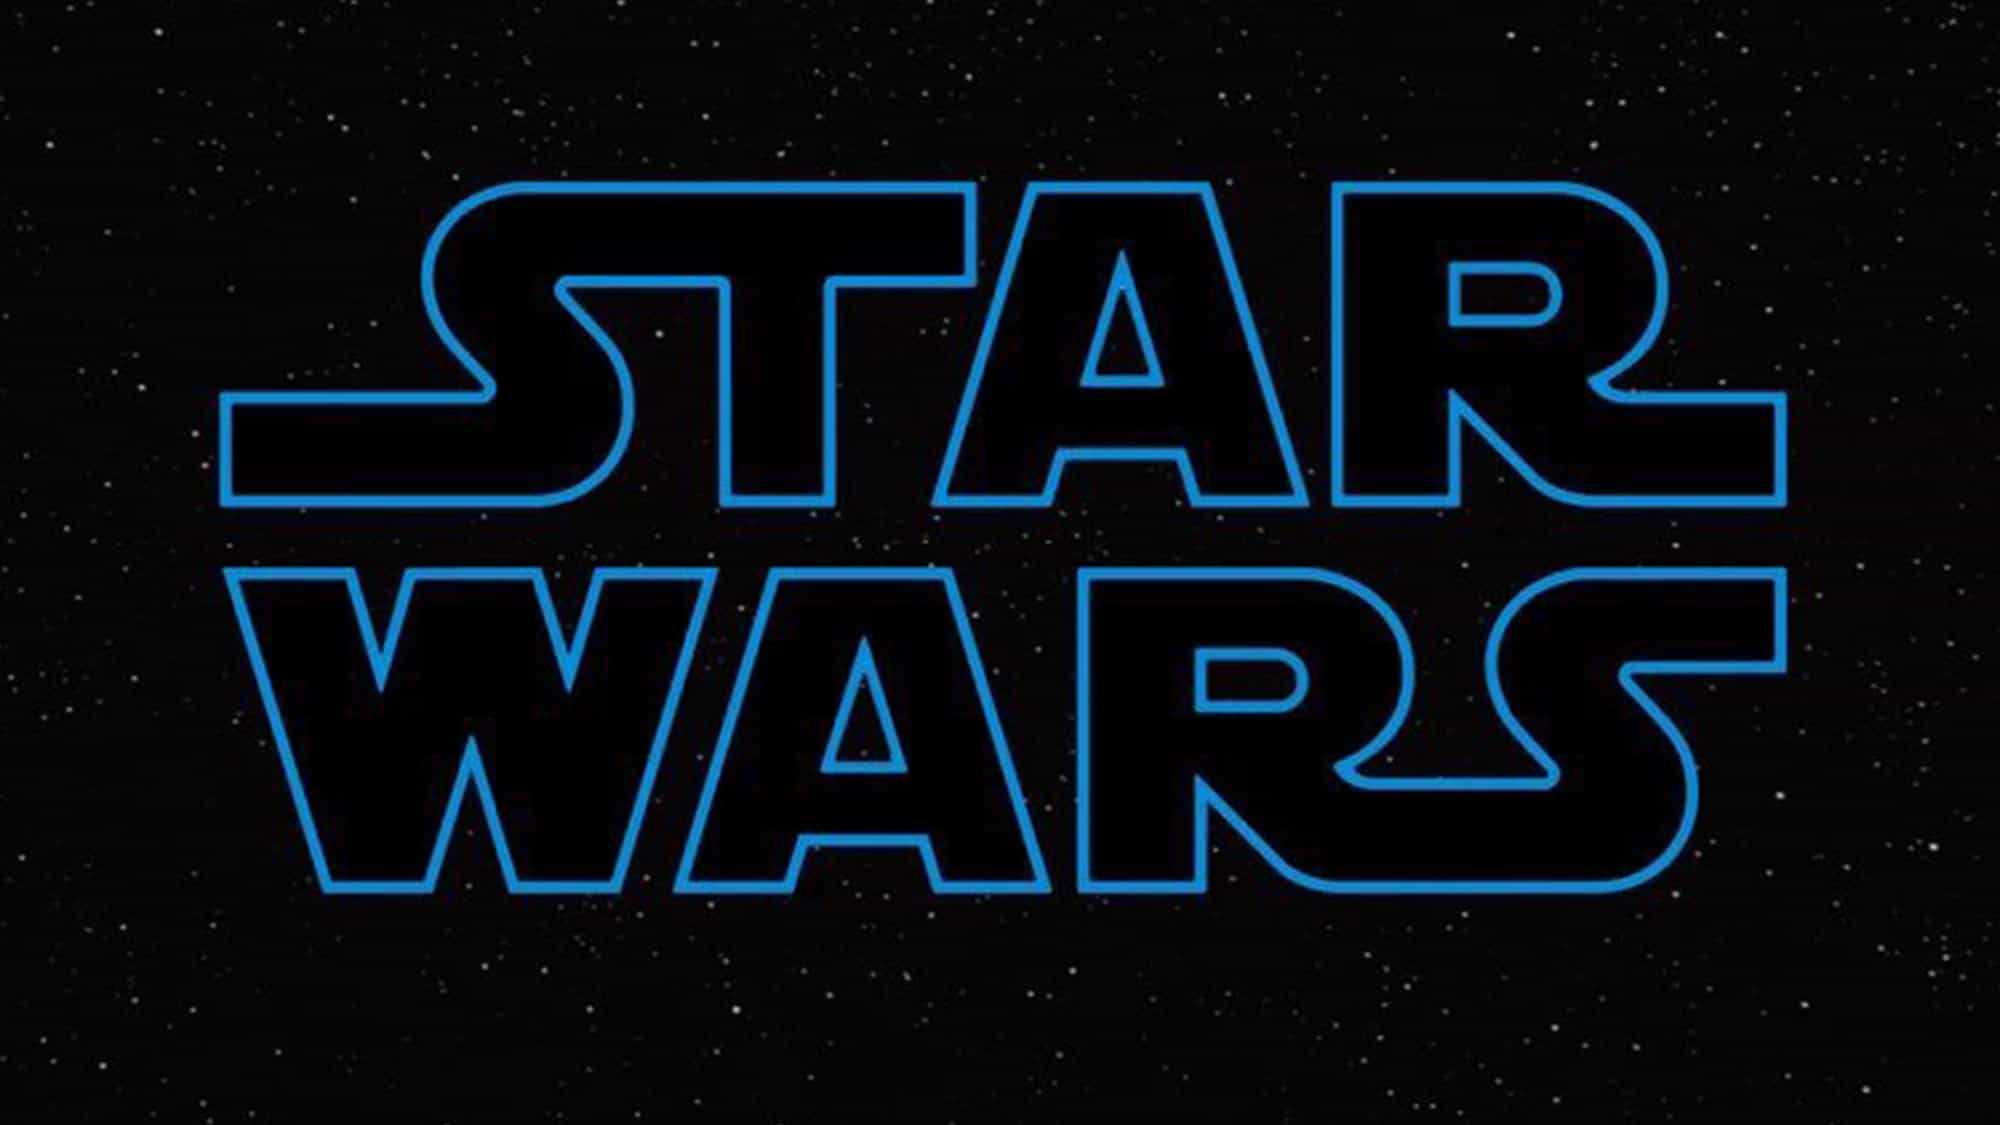 Annoyingly Disney have announced that Star Wars Episode VIII will be release on 15 December 2017 rather than May 2017.